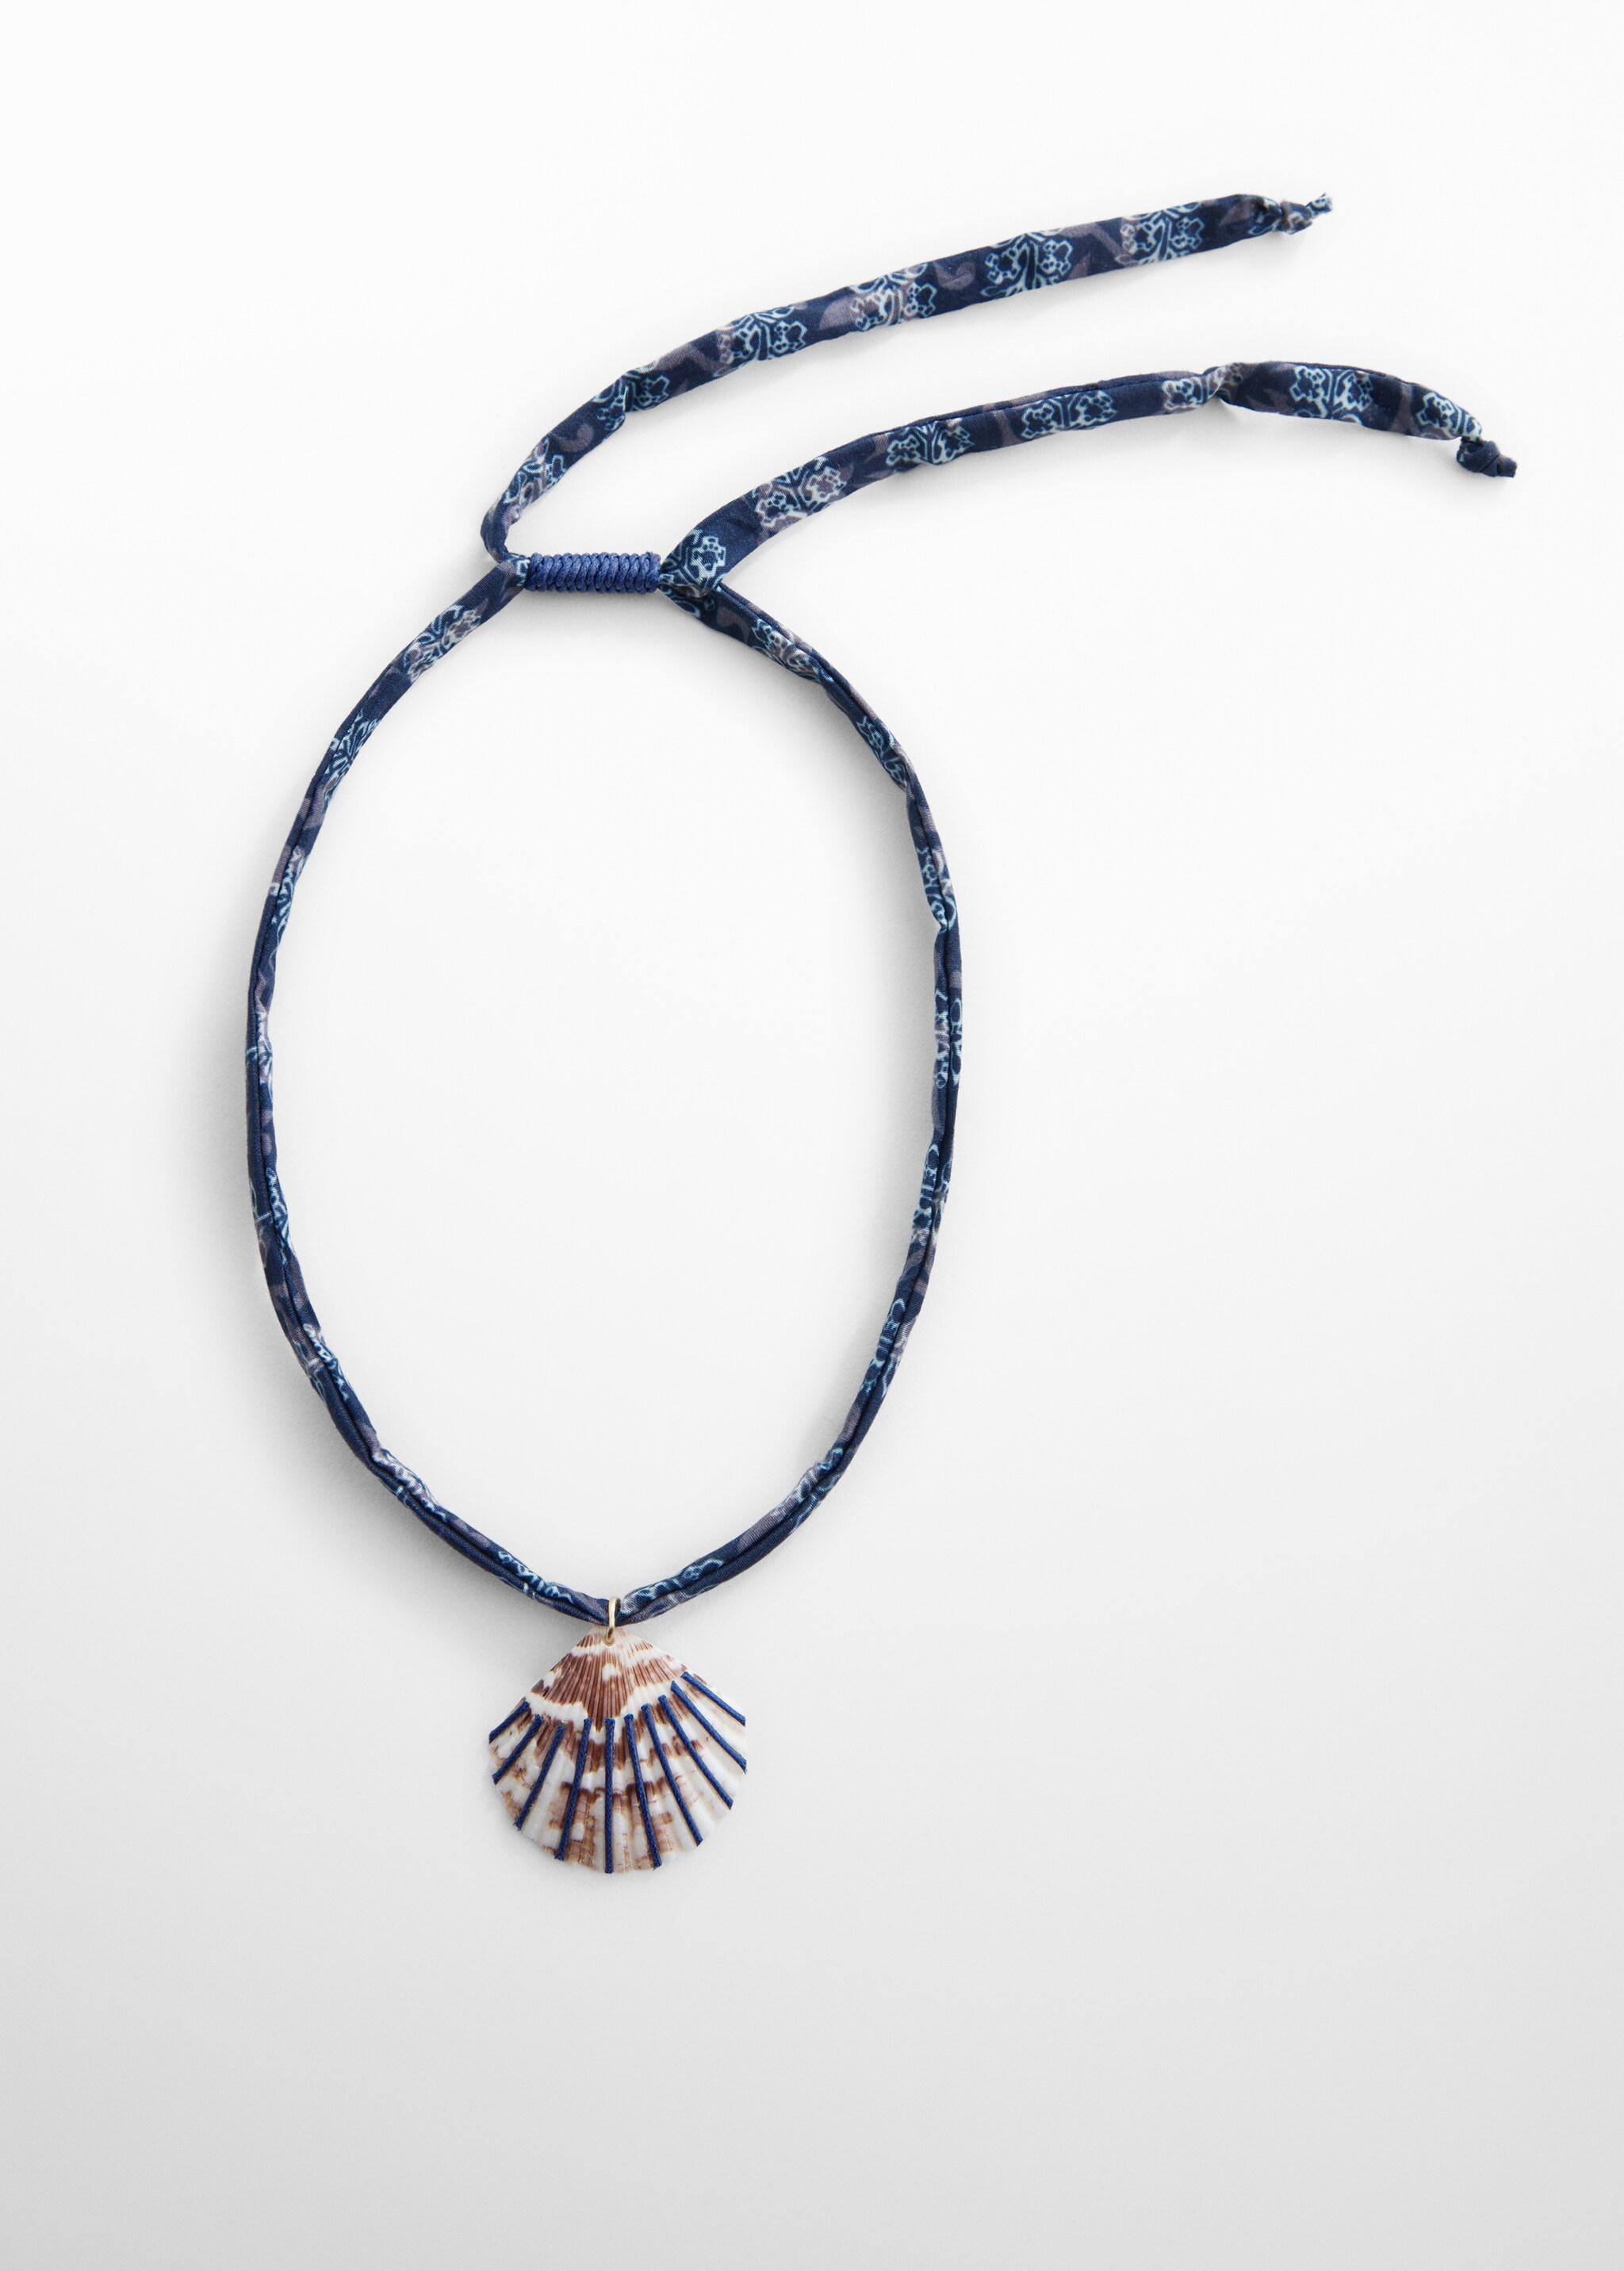 Shell necklace - Article without model